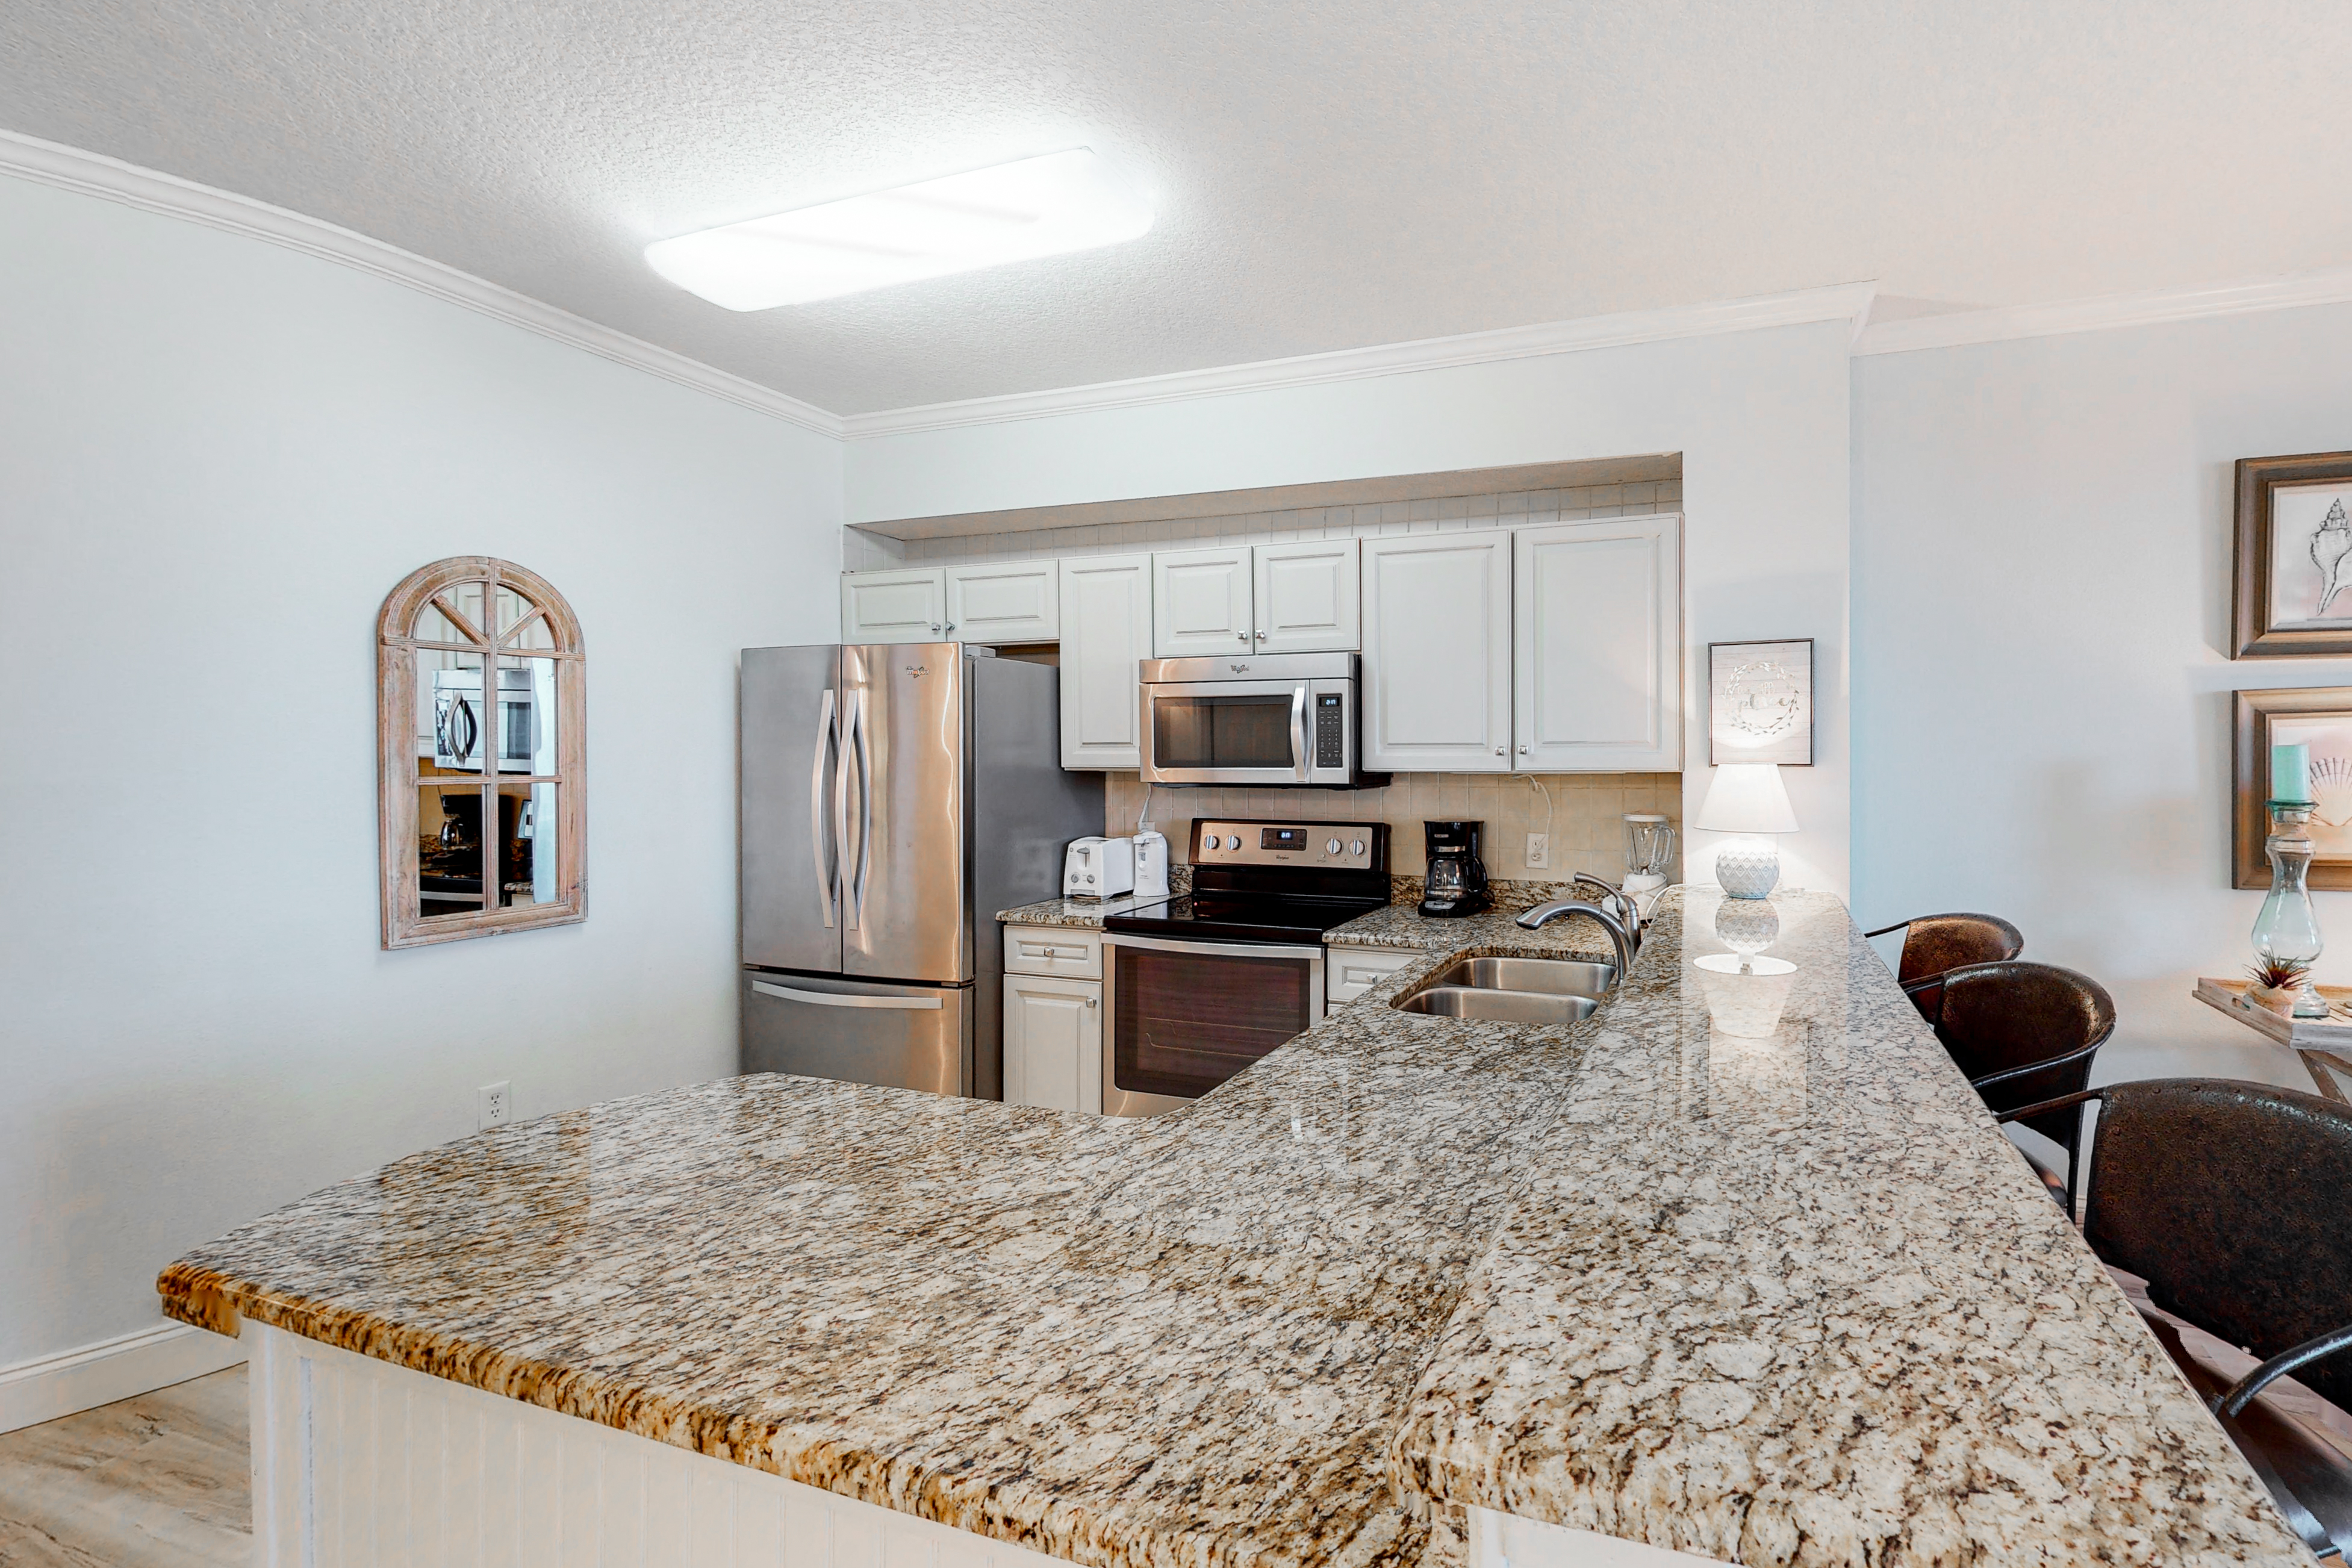 Dunes of Seagrove B101 Condo rental in Dunes of Seagrove in Highway 30-A Florida - #6